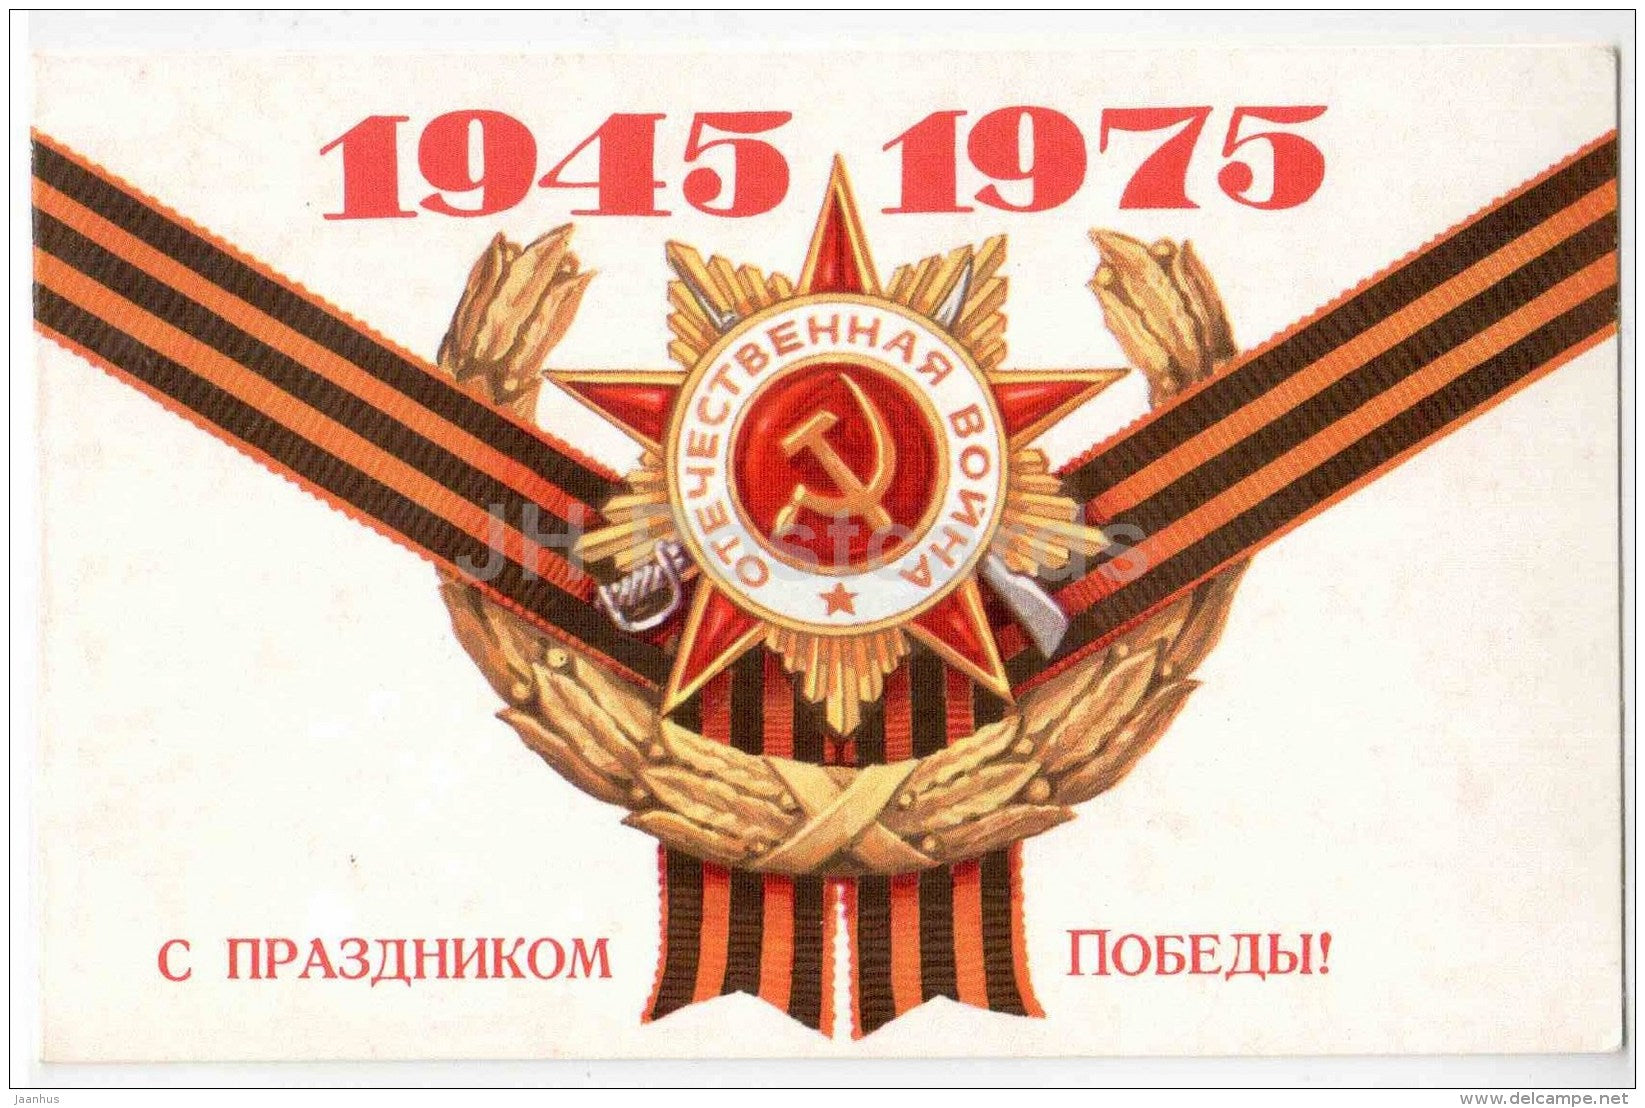 Victory Day anniversary - Order of Great Patriotic War - sent to retired Soviet Major - 1975 - Russia USSR - used - JH Postcards